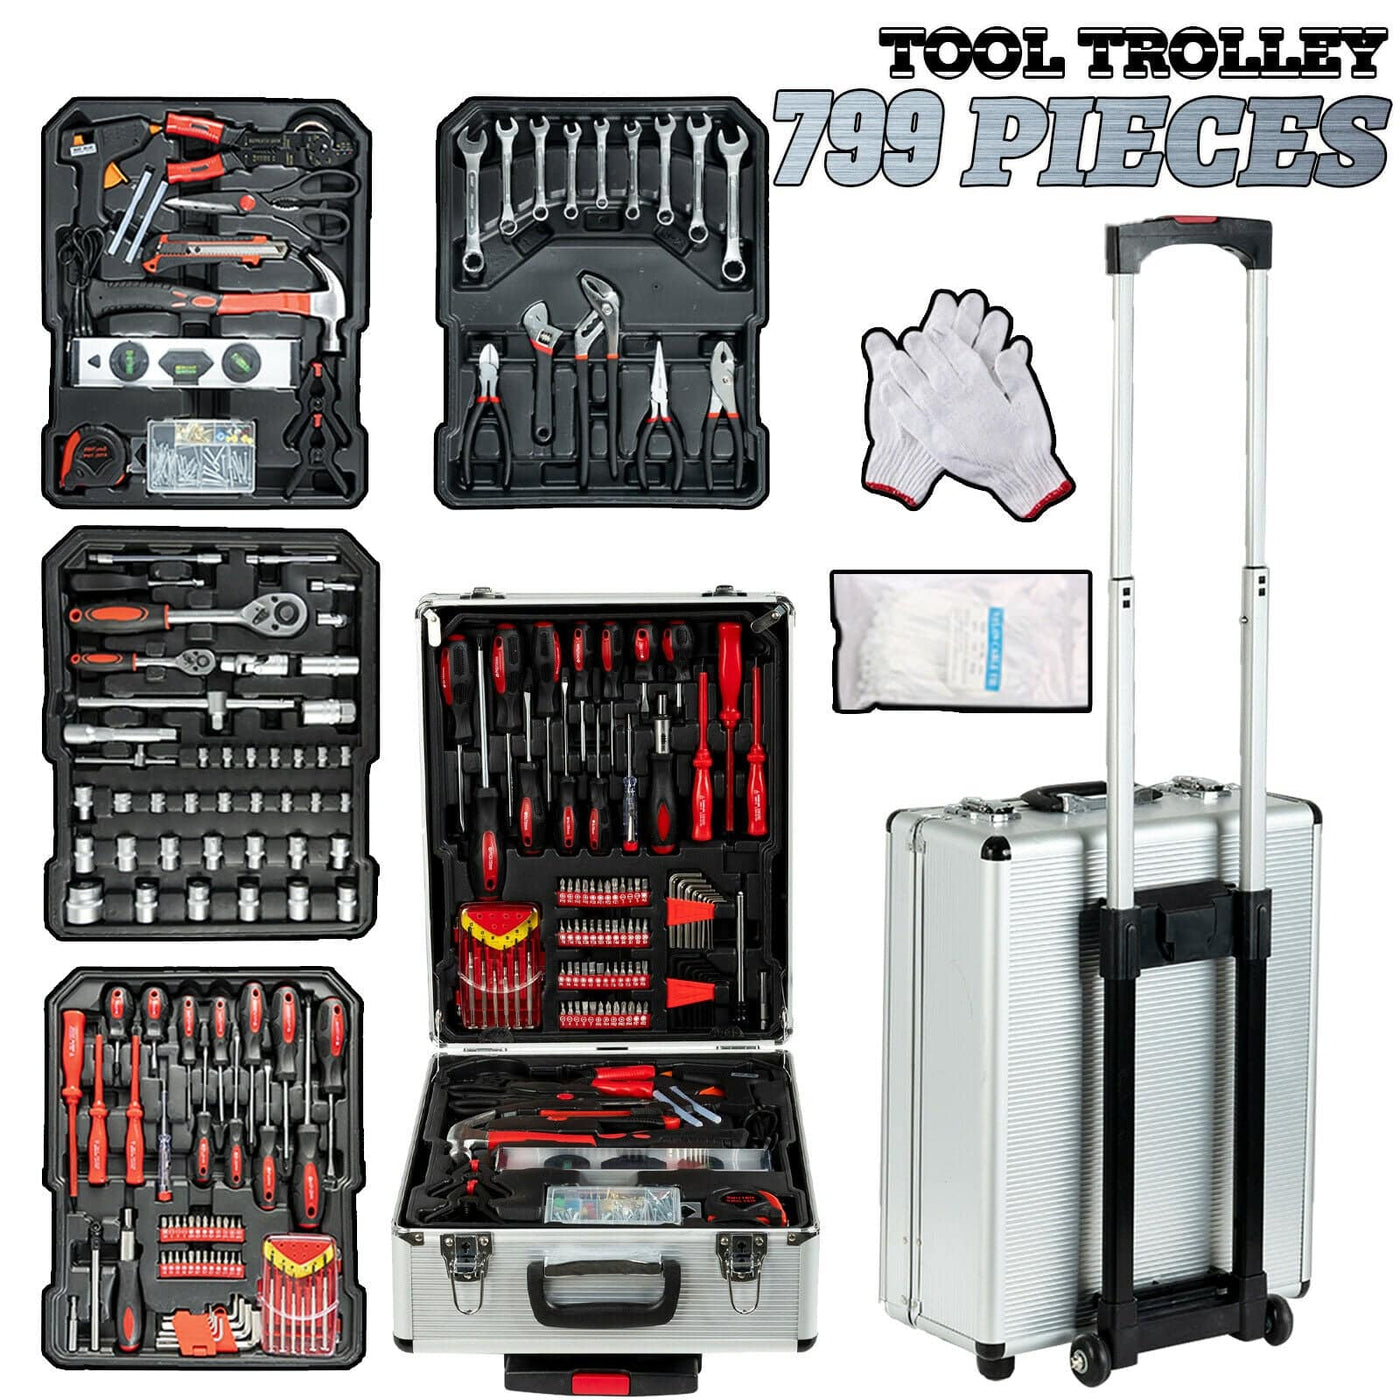 1000 Piece Tool Kit With Trolley (Online Only)